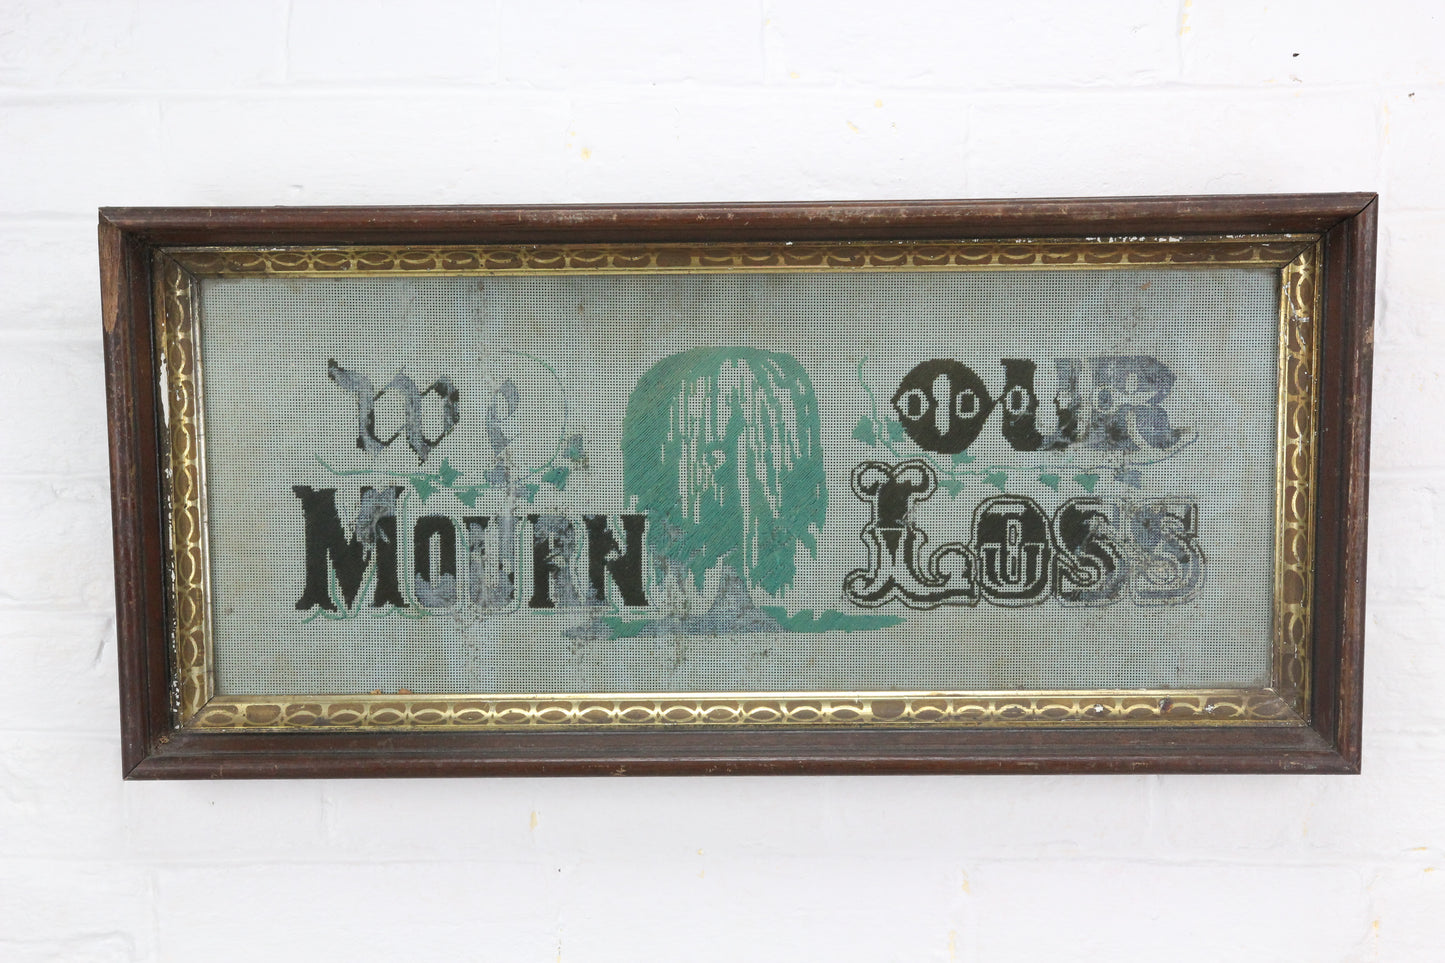 Antique Mourning Needlepoint Embroidery, "We Mourn Our Loss" - 23.5" x 11"